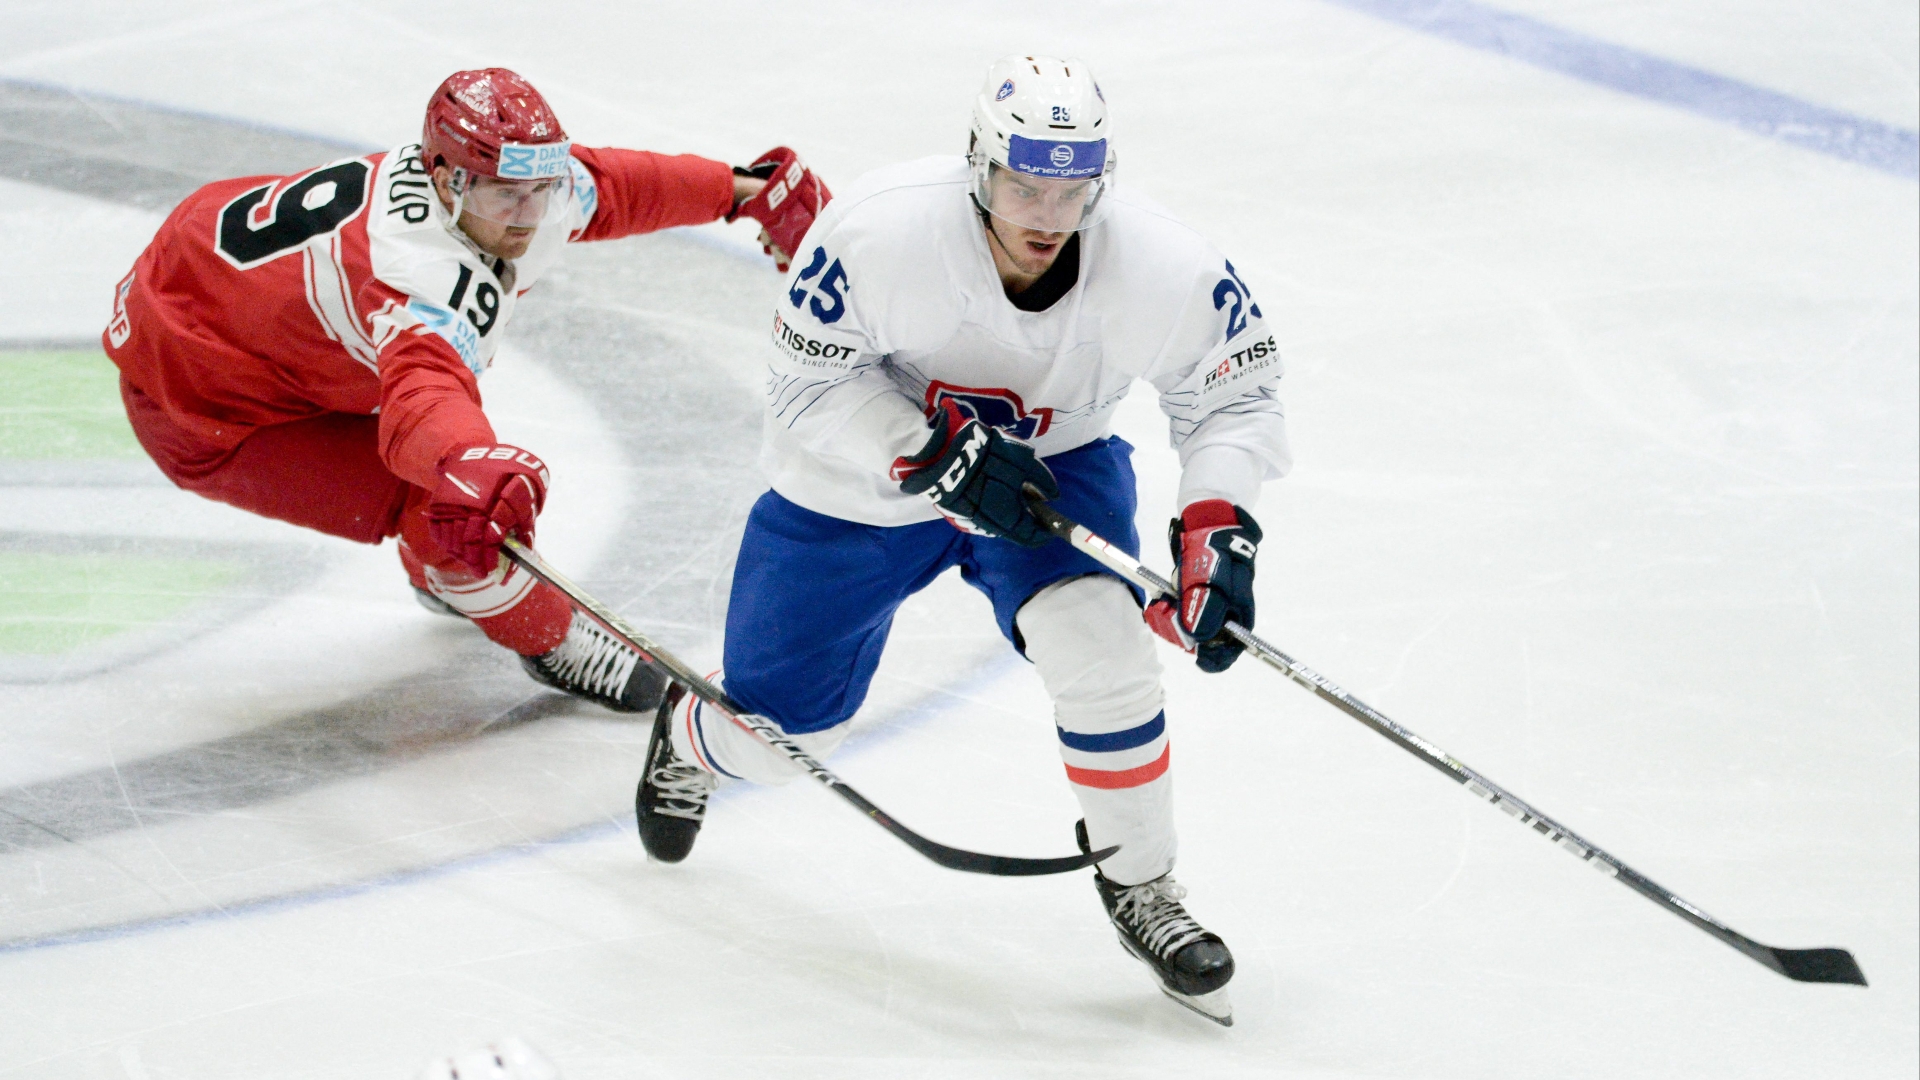 France vs Hungary Ice Hockey Live Stream Today - Can France Return To ...